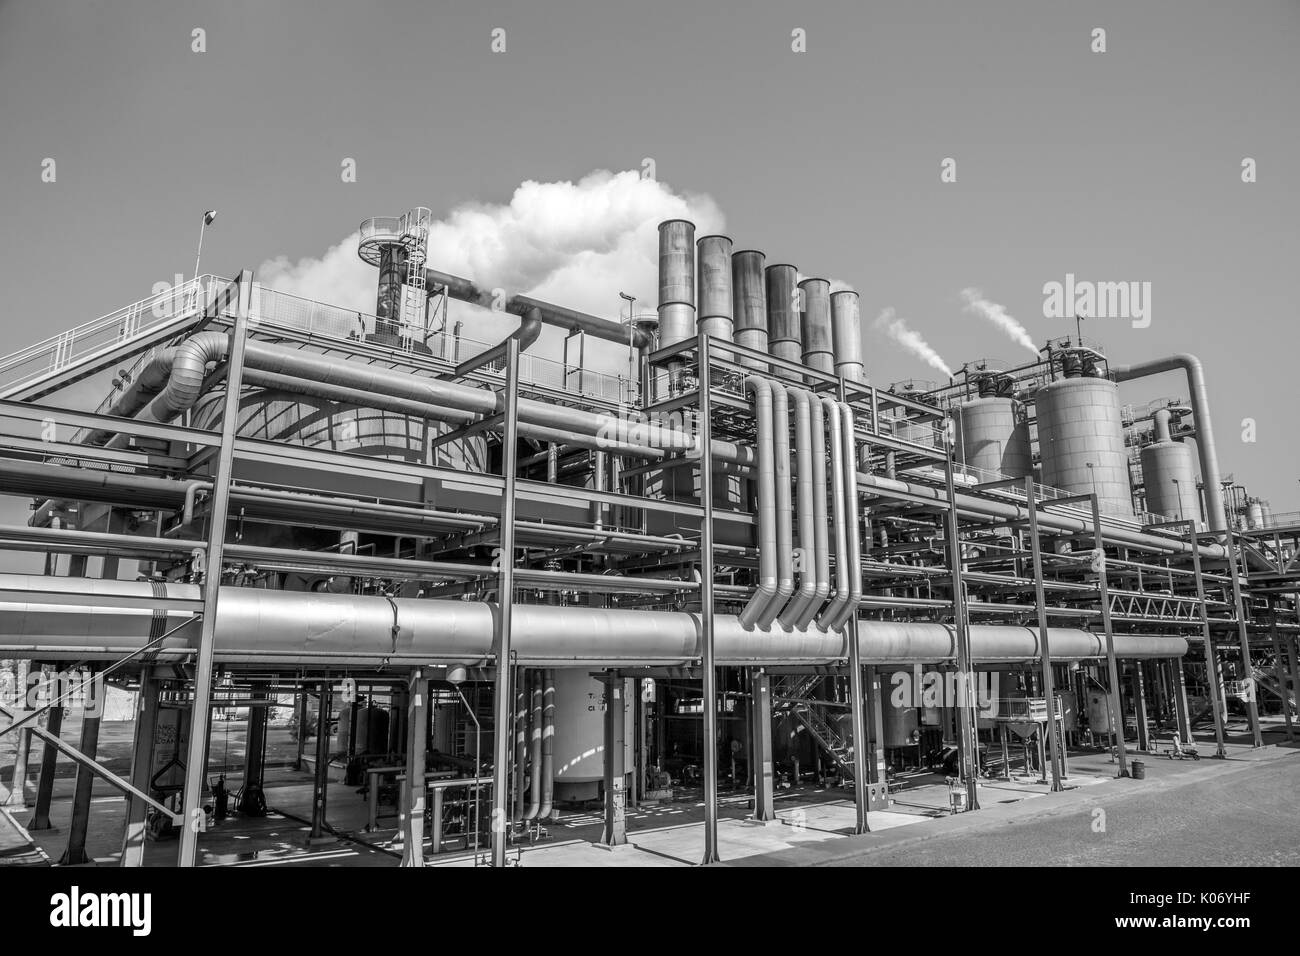 sugar cane factory industry Stock Photo